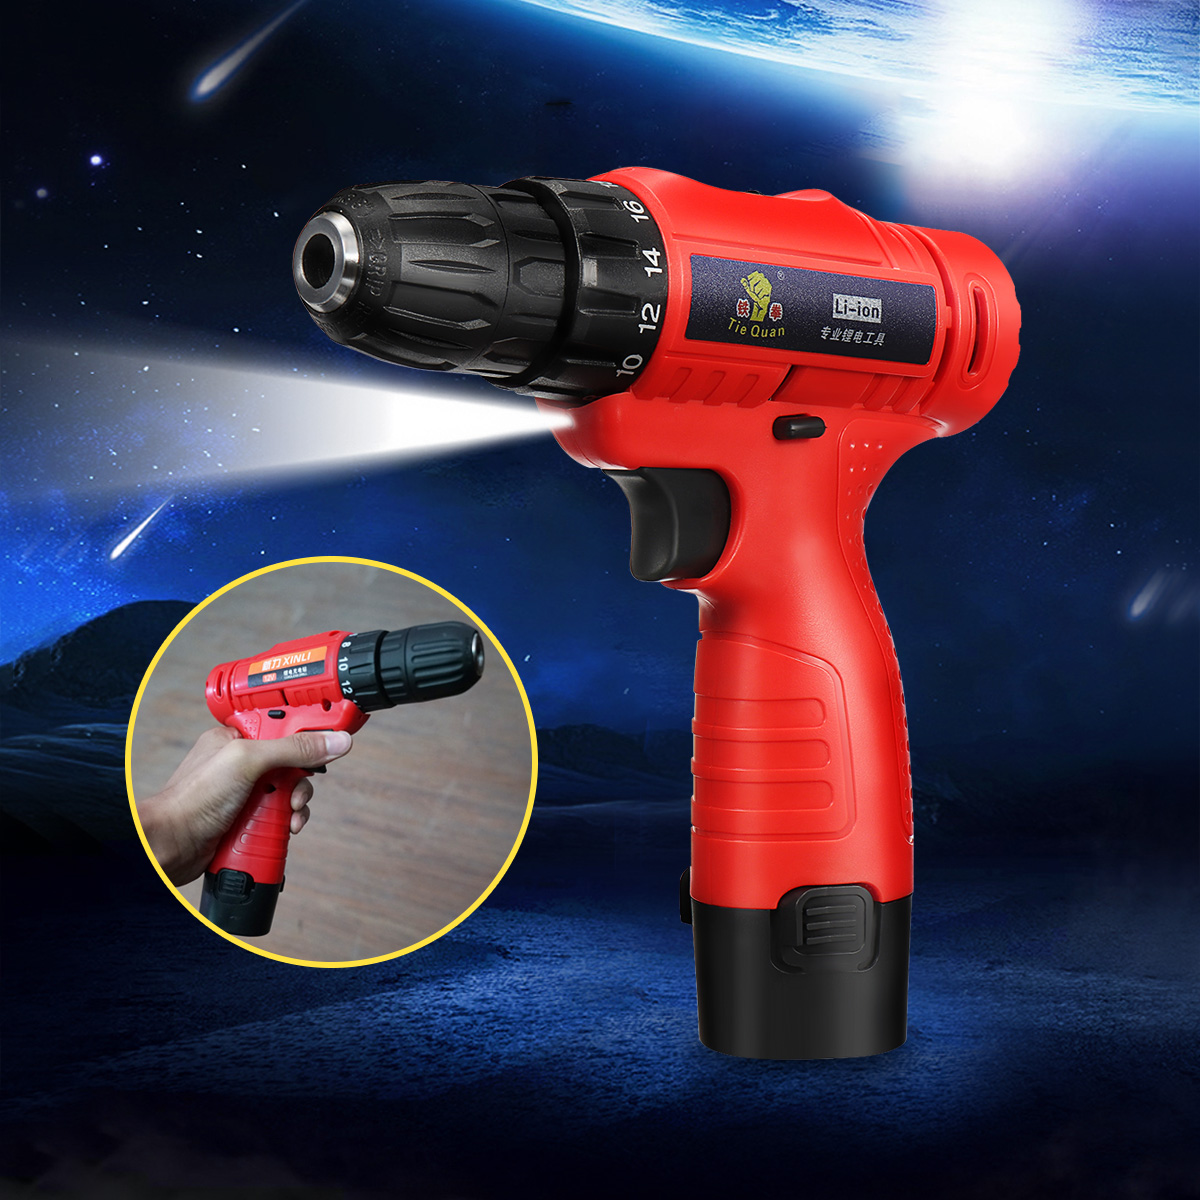 110V-240V-Cordless-Electric-Screwdriver-1-Battery-1-Charger-Drilling-Punching-Power-Tools-1287724-3